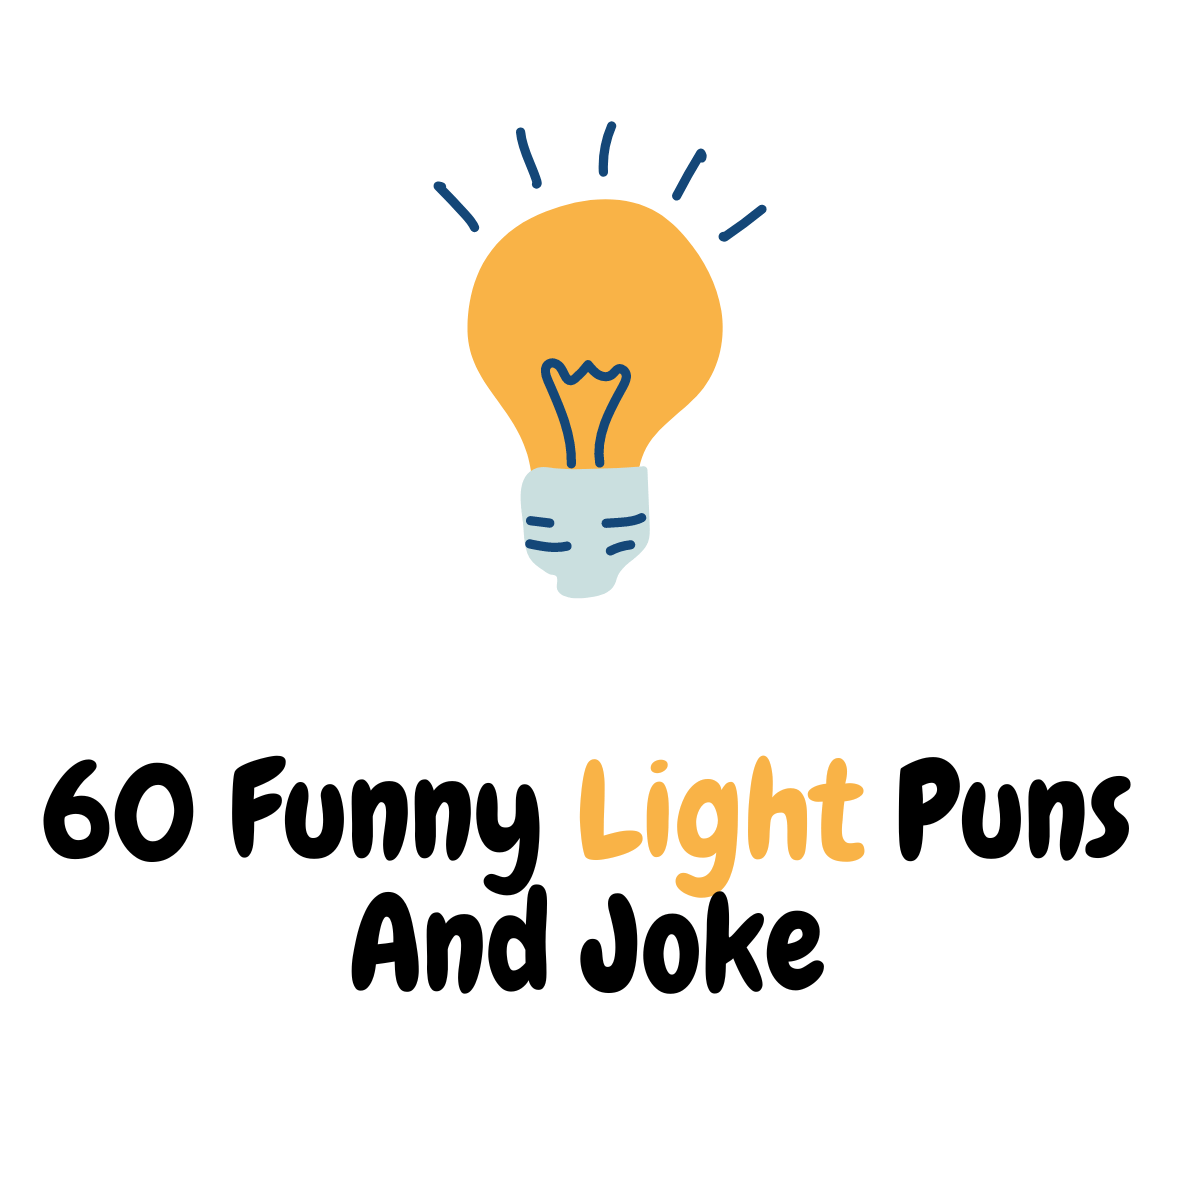 60+ Funny Light Puns And Jokes: Glowing with - Funniest Puns